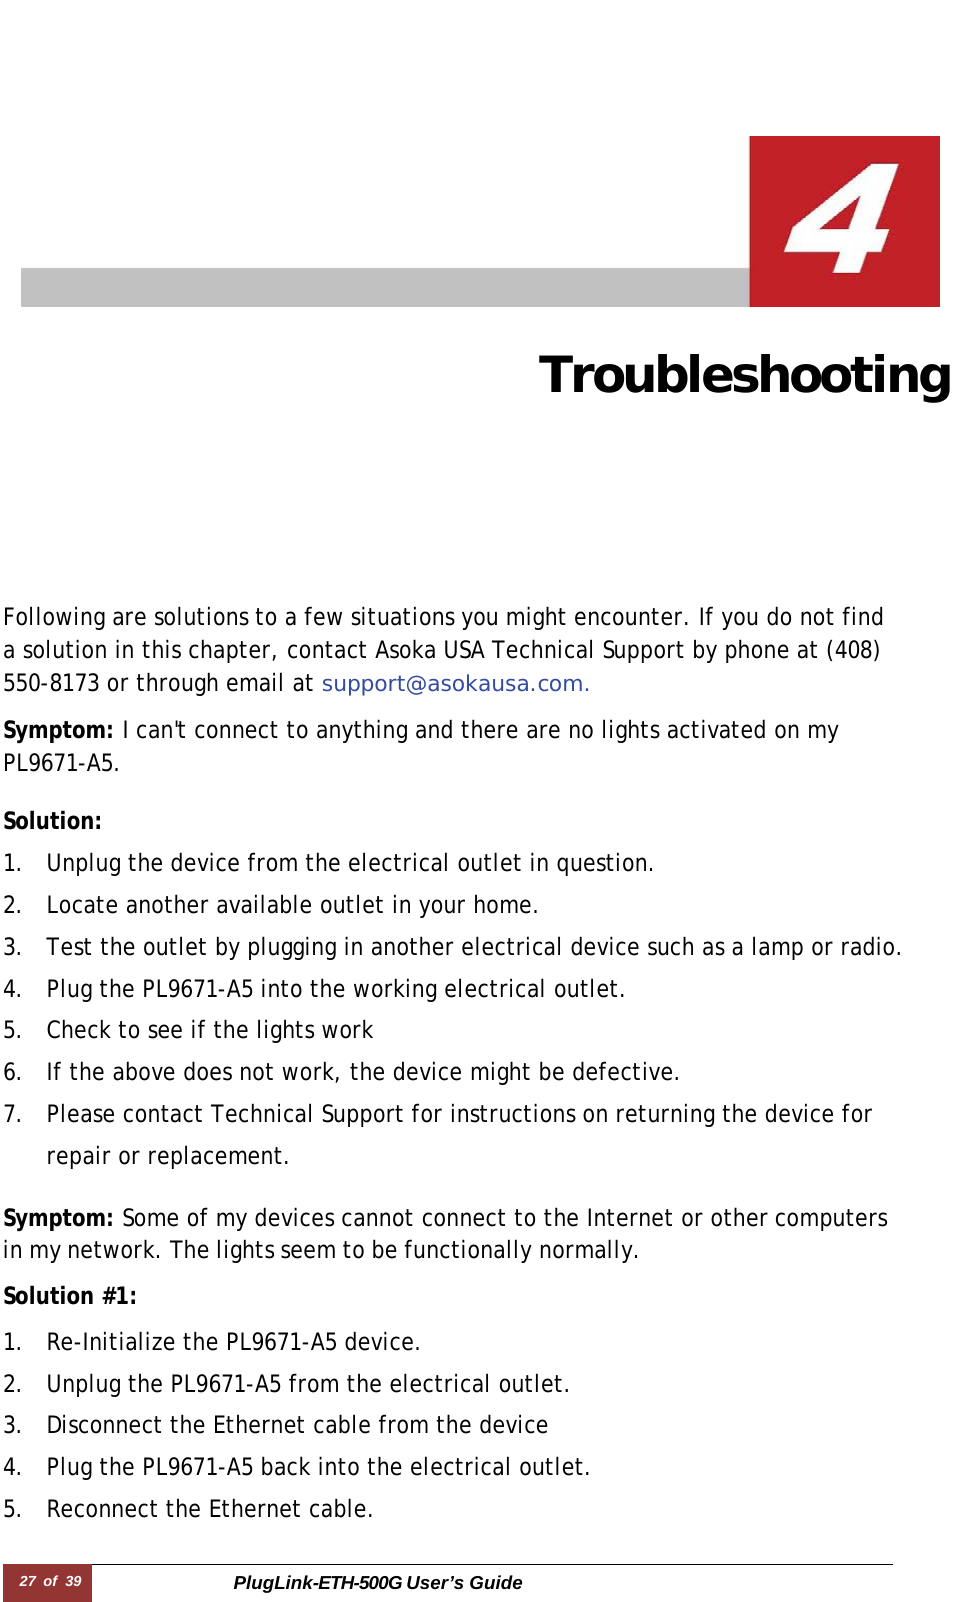 27  of  39 PlugLink-ETH-500G User’s Guide   Troubleshooting   Following are solutions to a few situations you might encounter. If you do not find a solution in this chapter, contact Asoka USA Technical Support by phone at (408) 550-8173 or through email at support@asokausa.com.  Symptom: I can&apos;t connect to anything and there are no lights activated on my PL9671-A5.  Solution:  1. Unplug the device from the electrical outlet in question. 2. Locate another available outlet in your home. 3. Test the outlet by plugging in another electrical device such as a lamp or radio. 4. Plug the PL9671-A5 into the working electrical outlet. 5. Check to see if the lights work 6. If the above does not work, the device might be defective. 7. Please contact Technical Support for instructions on returning the device for repair or replacement.  Symptom: Some of my devices cannot connect to the Internet or other computers in my network. The lights seem to be functionally normally.  Solution #1:  1. Re-Initialize the PL9671-A5 device. 2. Unplug the PL9671-A5 from the electrical outlet. 3. Disconnect the Ethernet cable from the device 4. Plug the PL9671-A5 back into the electrical outlet. 5. Reconnect the Ethernet cable. 